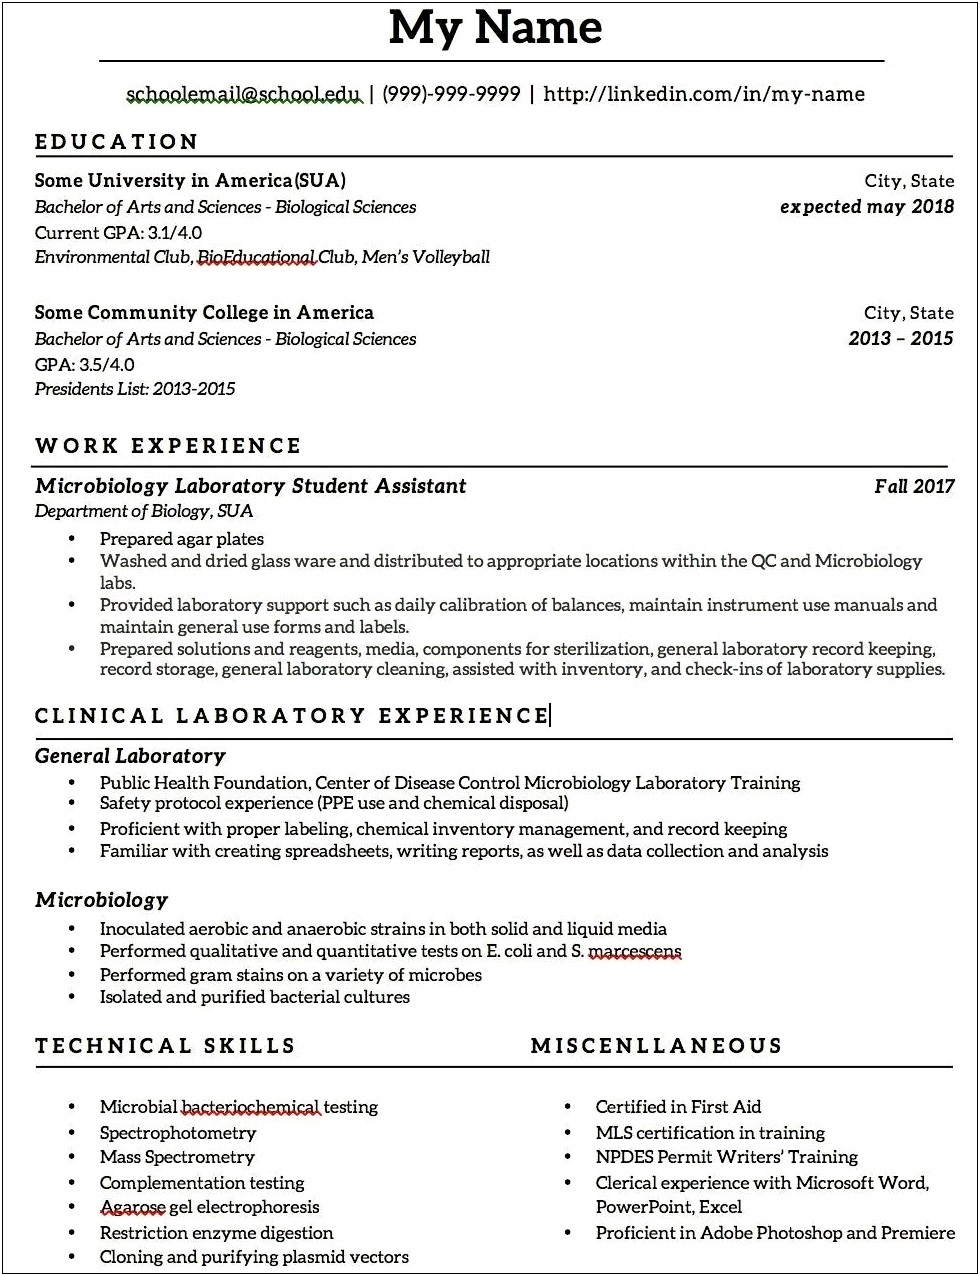 Resume Objective For Medical Laboratory Technician